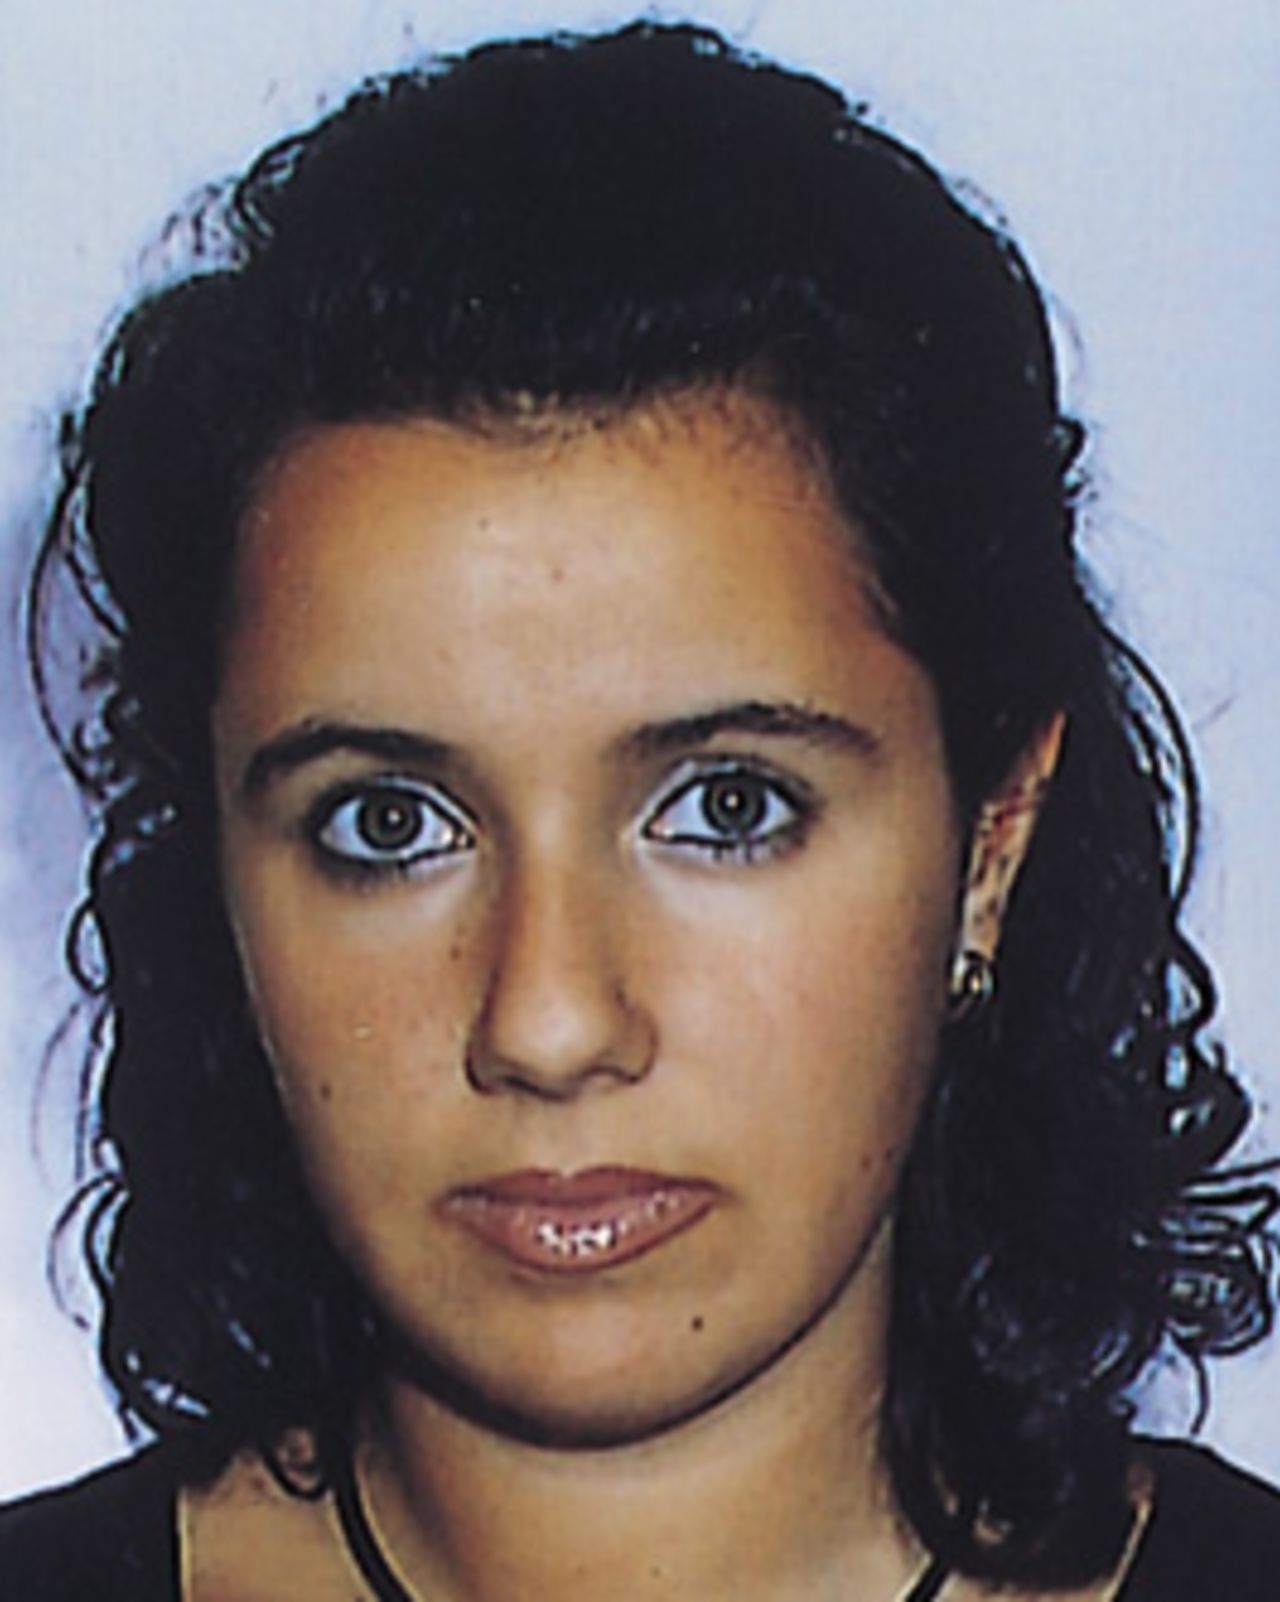 Portrait of Lara Molins - Ireland player in the CricInfo Women's World Cup 2000